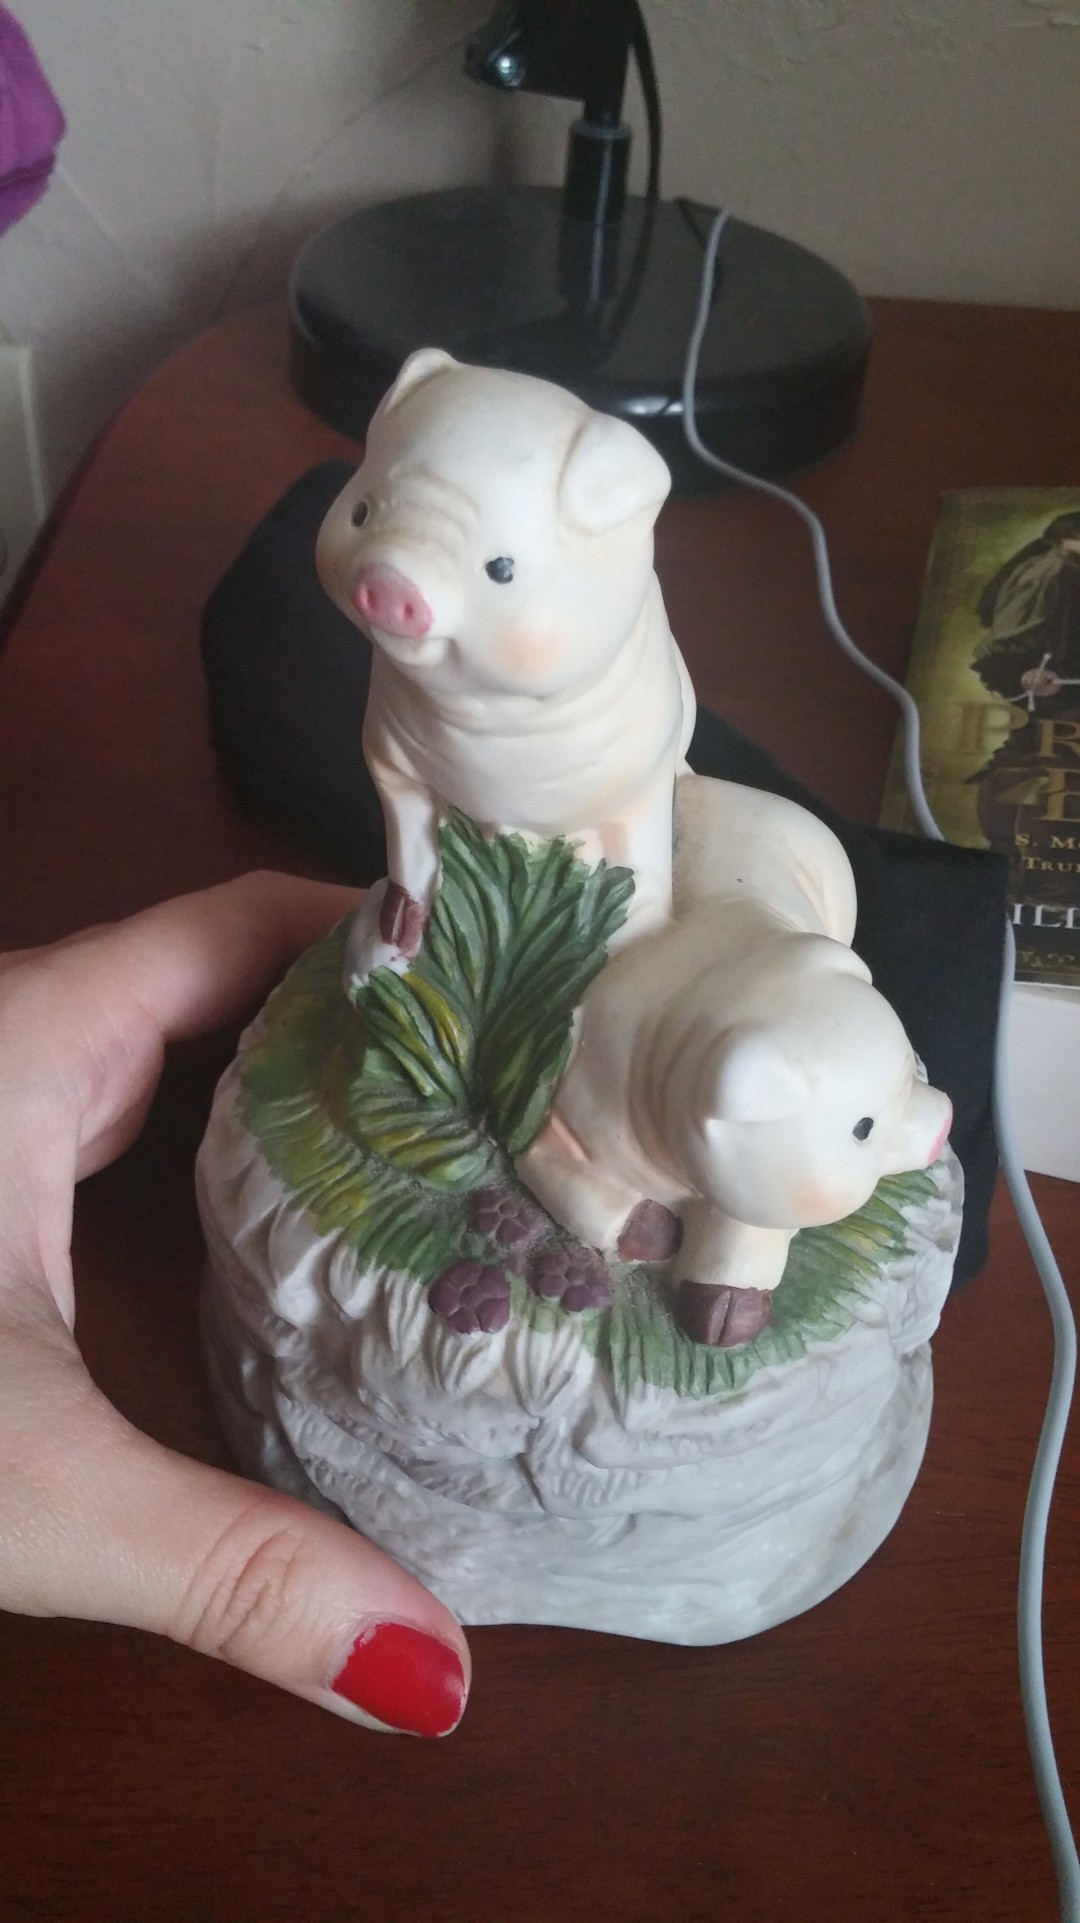 Today I said yes to these musical pigs and I don't regret it. They're amazing. 